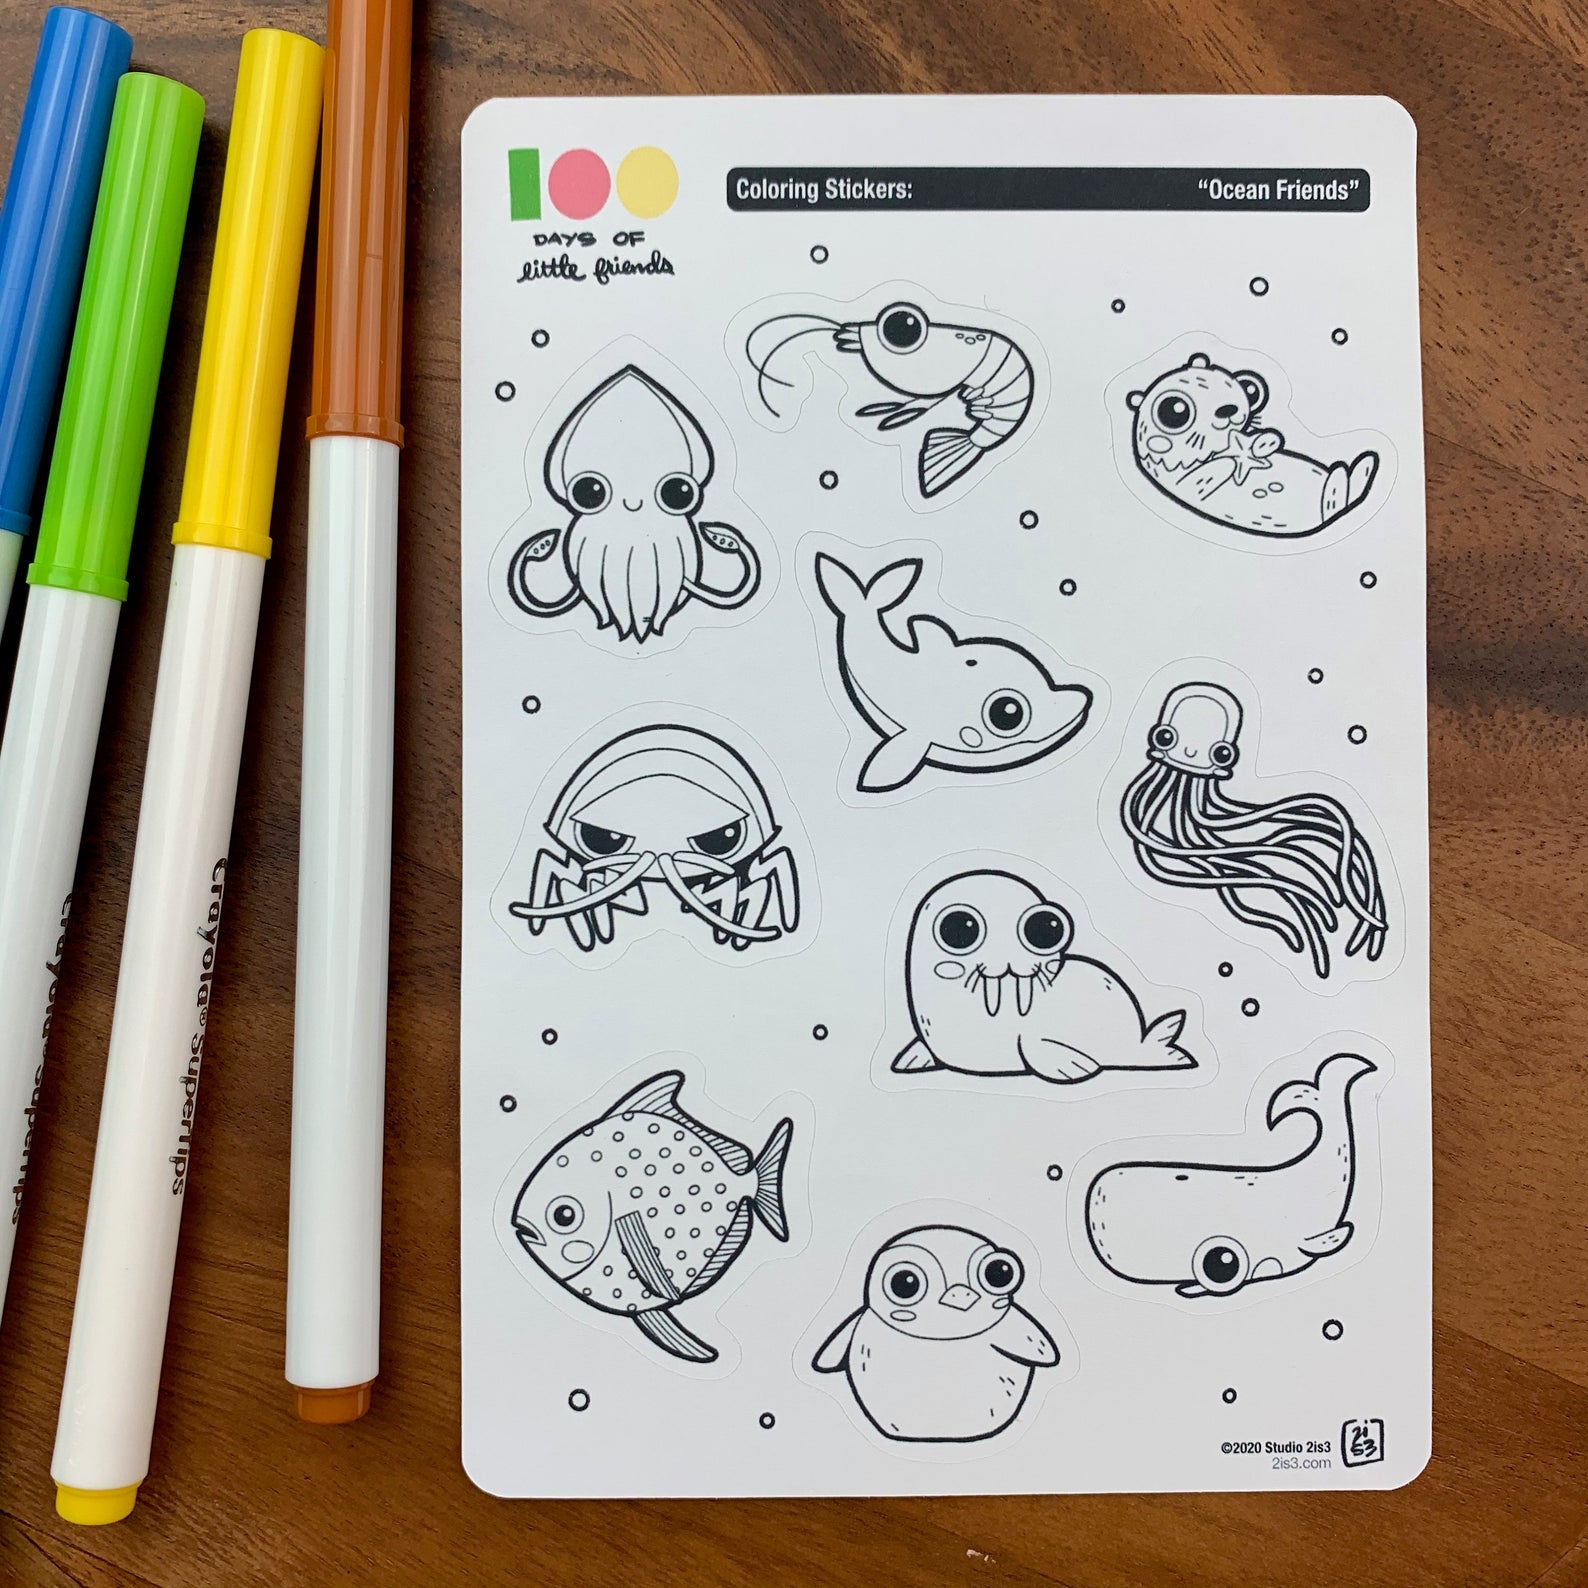 Markers and a sticker sheet with 10 little animal stickers on it. A Squid, Shrimp, Otter, Dolphin, Isopod, Walrus, Jellyfish, Opah, Penguin, and Whale.